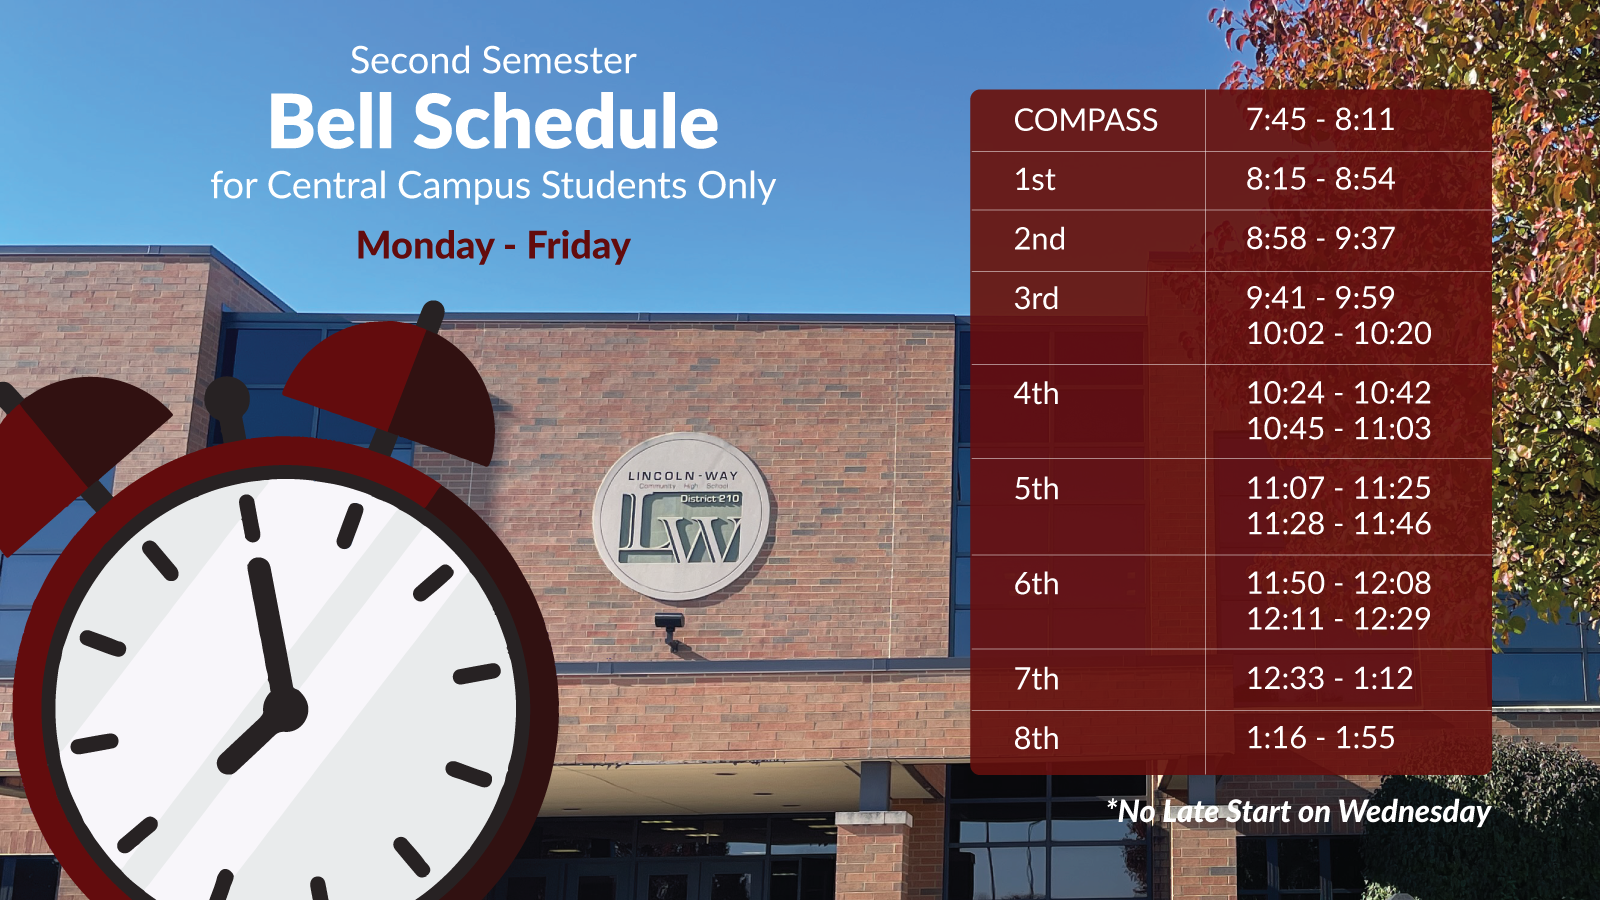 Central Campus Bell Schedule Monday - Friday